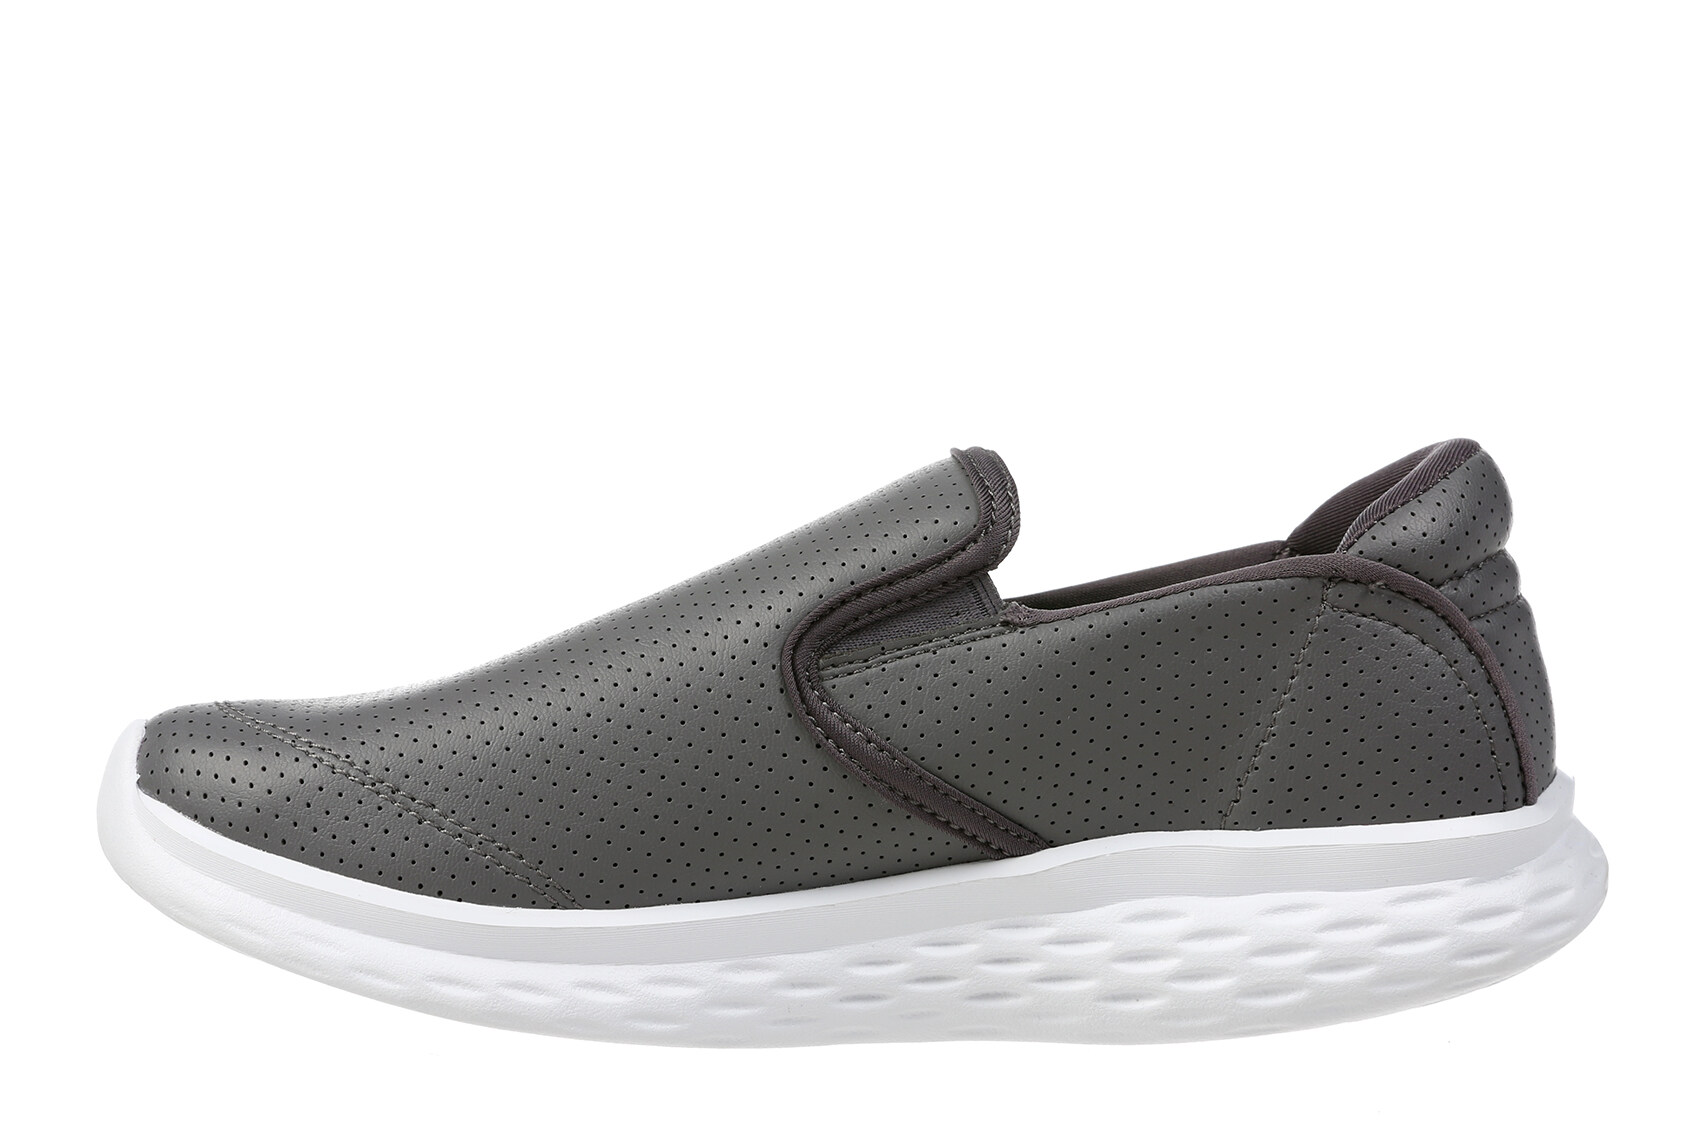 MBT MODENA SLIP ON SYNTHETIC LEATHER W RUNNING